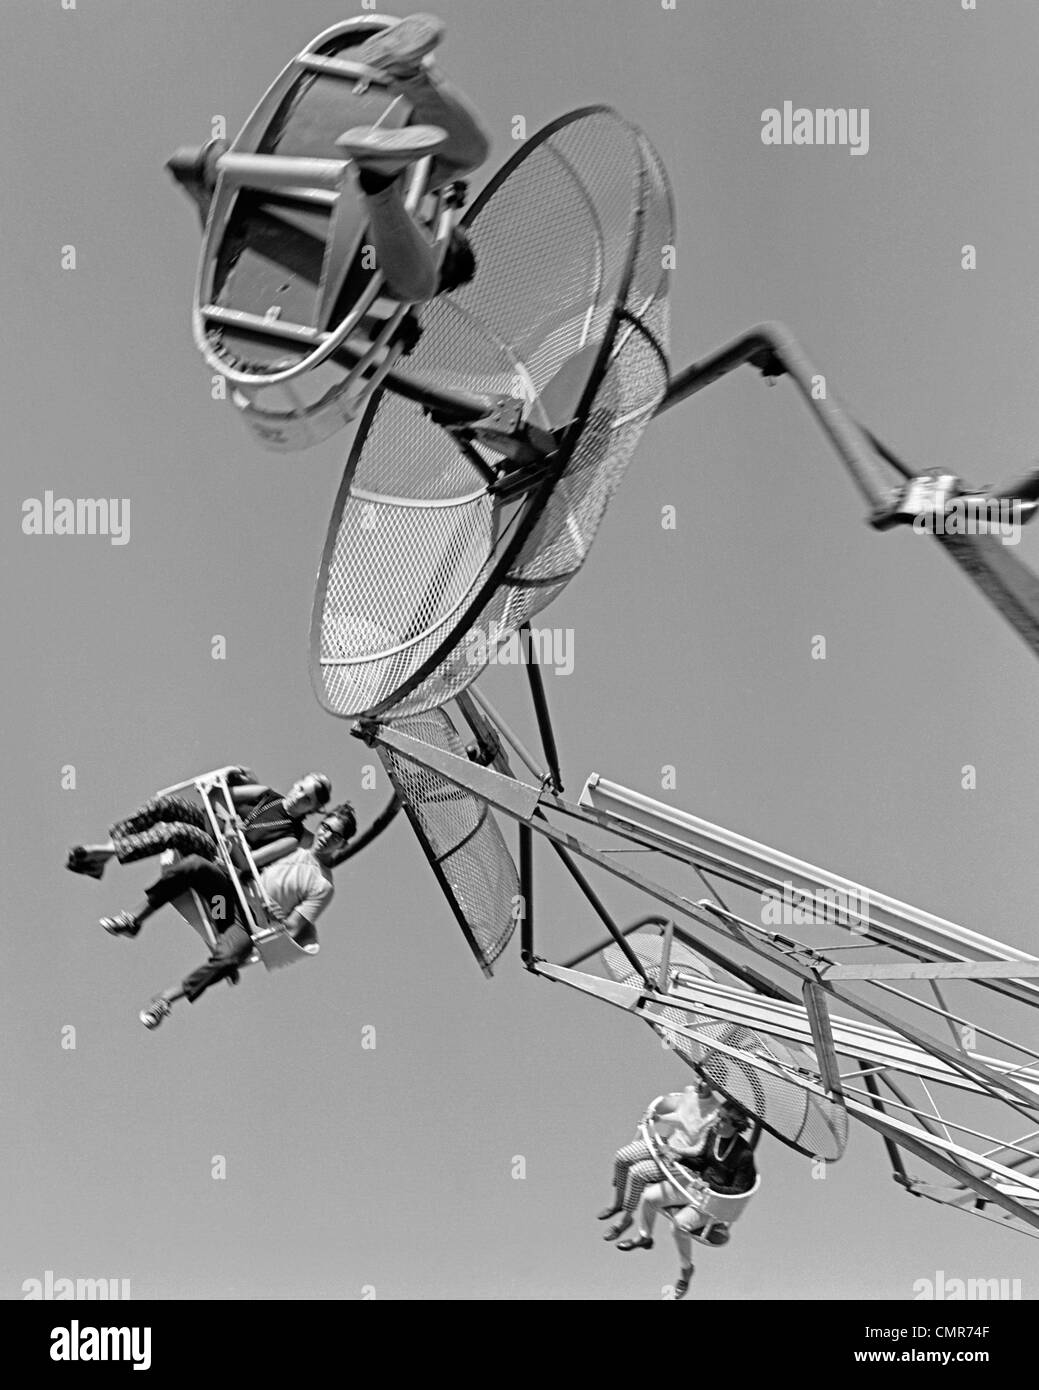 1960s SHOT OF COUPLES SEATED ON MOVING AMUSEMENT PARK RIDE Stock Photo